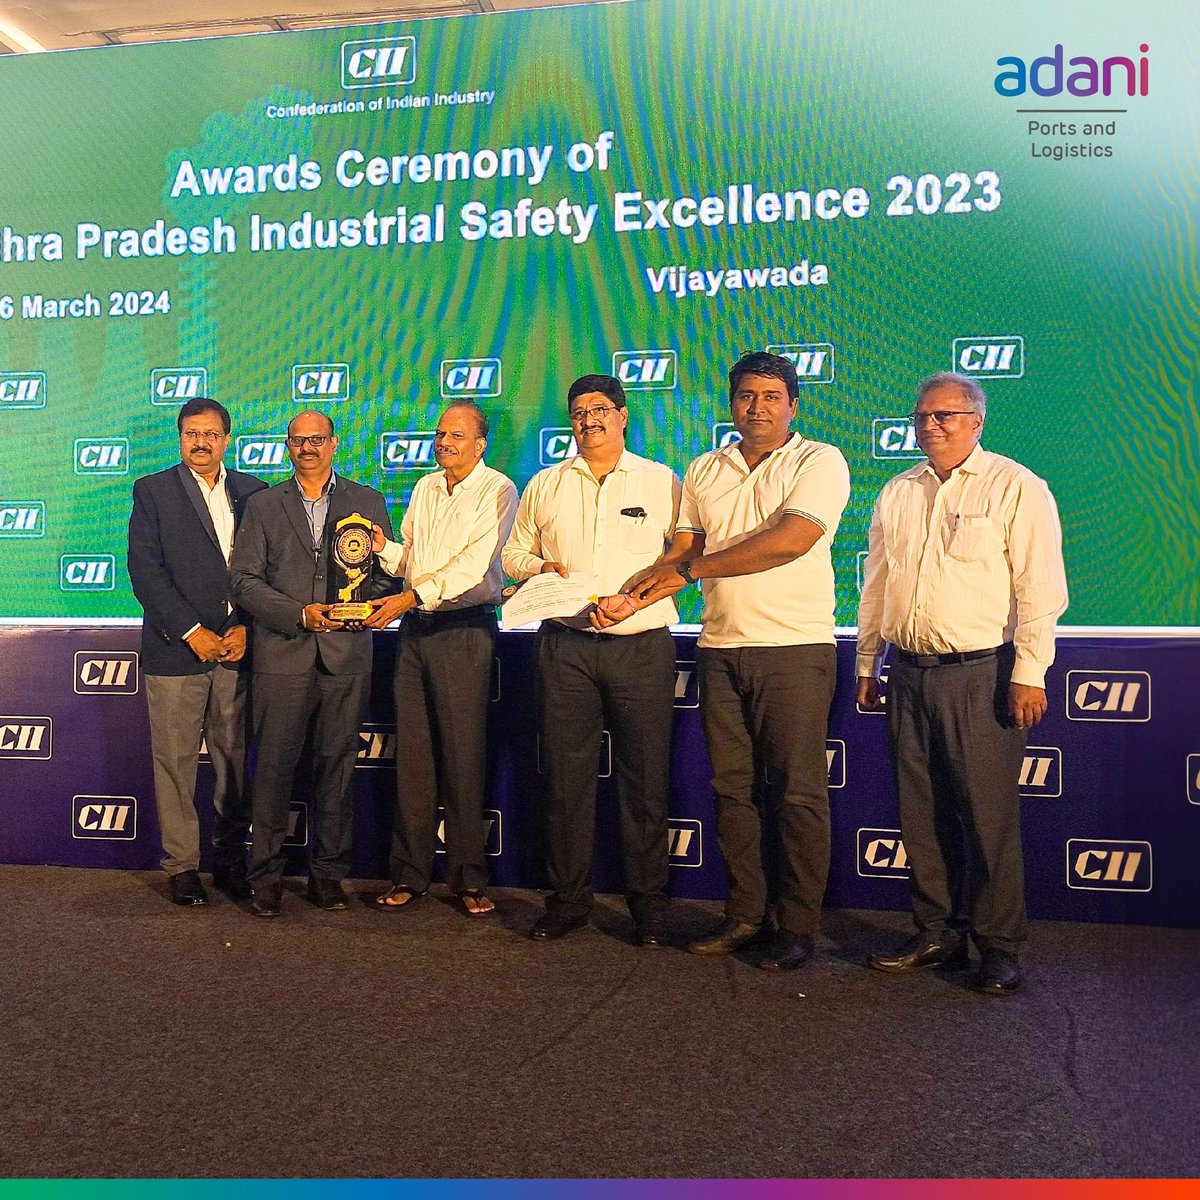 #KrishnapatnamPort has been honoured with the prestigious Gold Award at the CII Andhra Pradesh Industrial Safety Excellence Awards 2023.